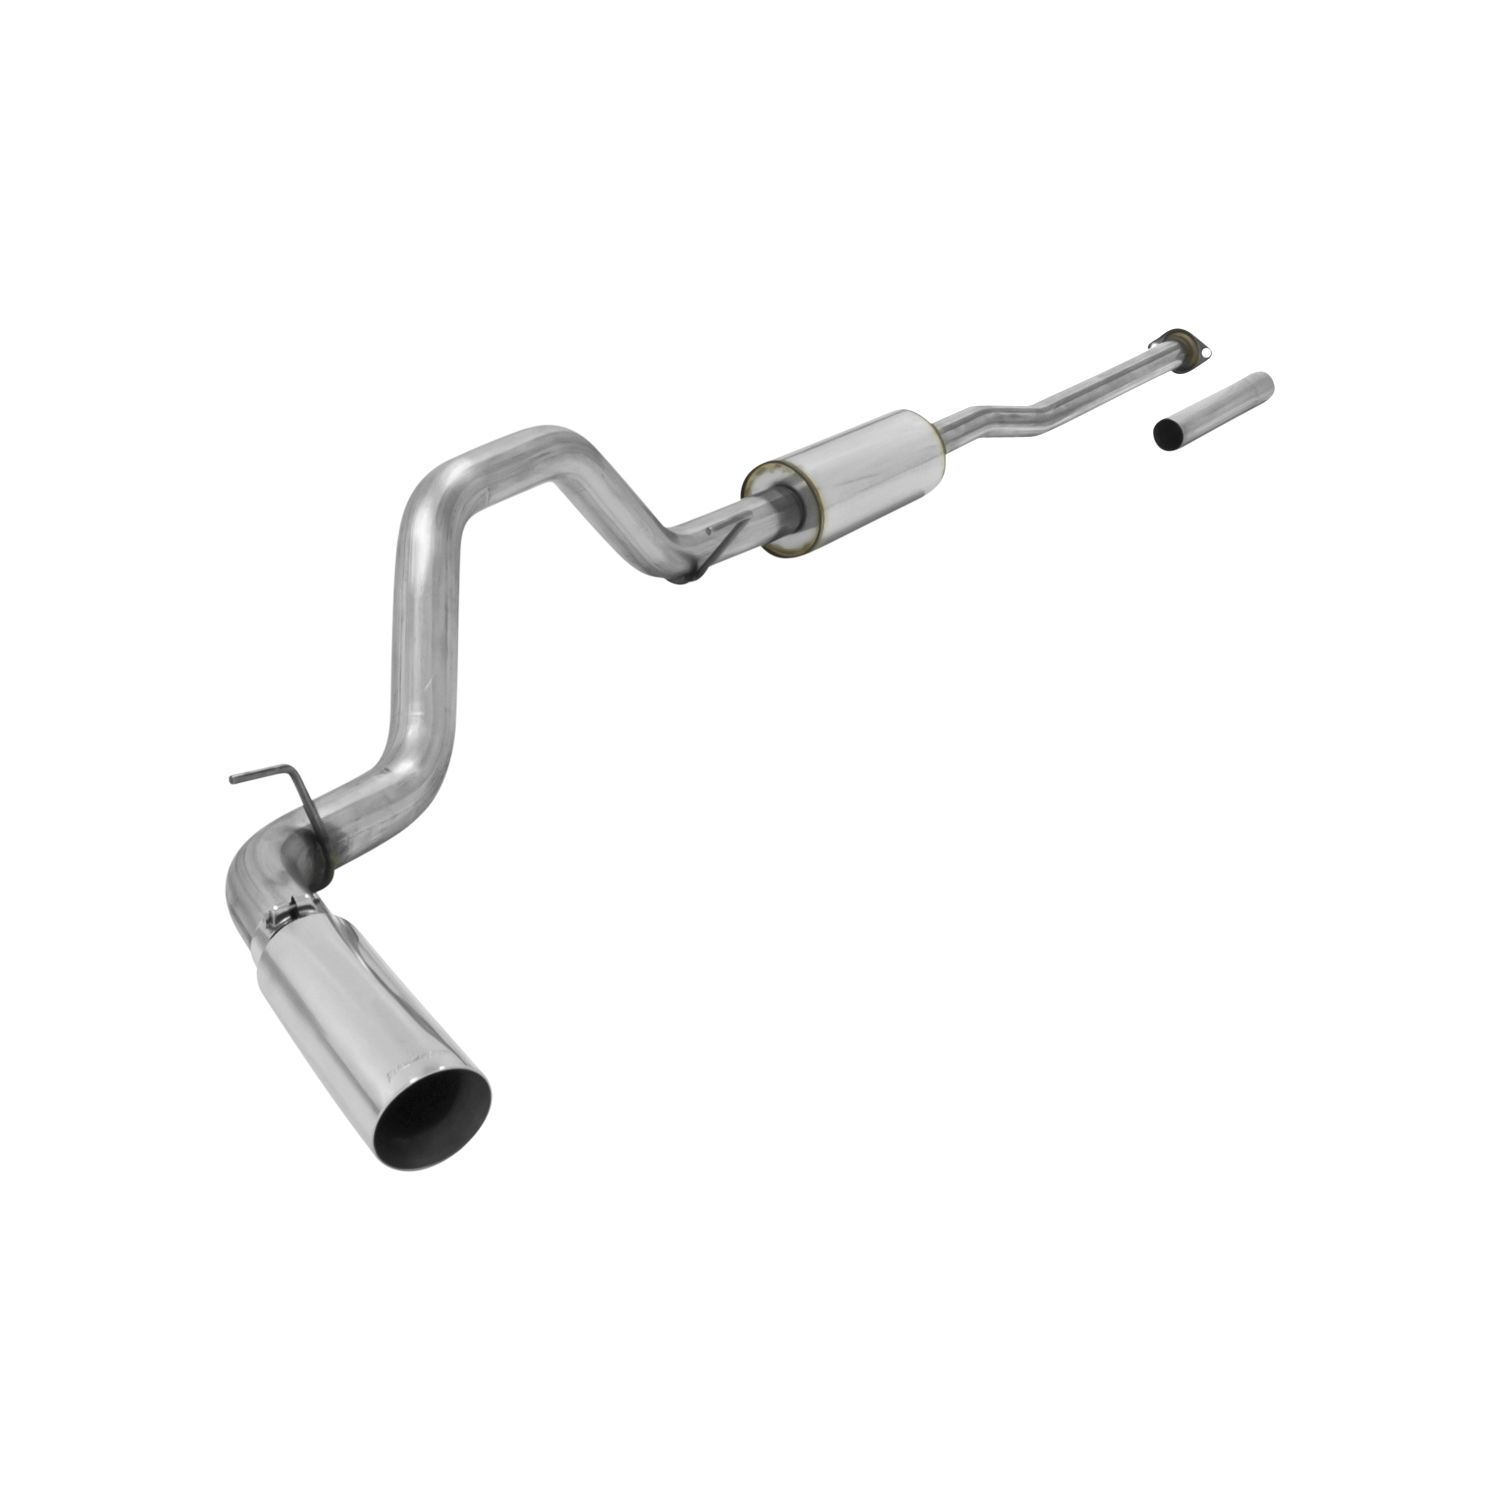 2015 Toyota Tacoma TRD Pro 4.0L Flowmaster dBX Cat-Back Exhaust - 817615